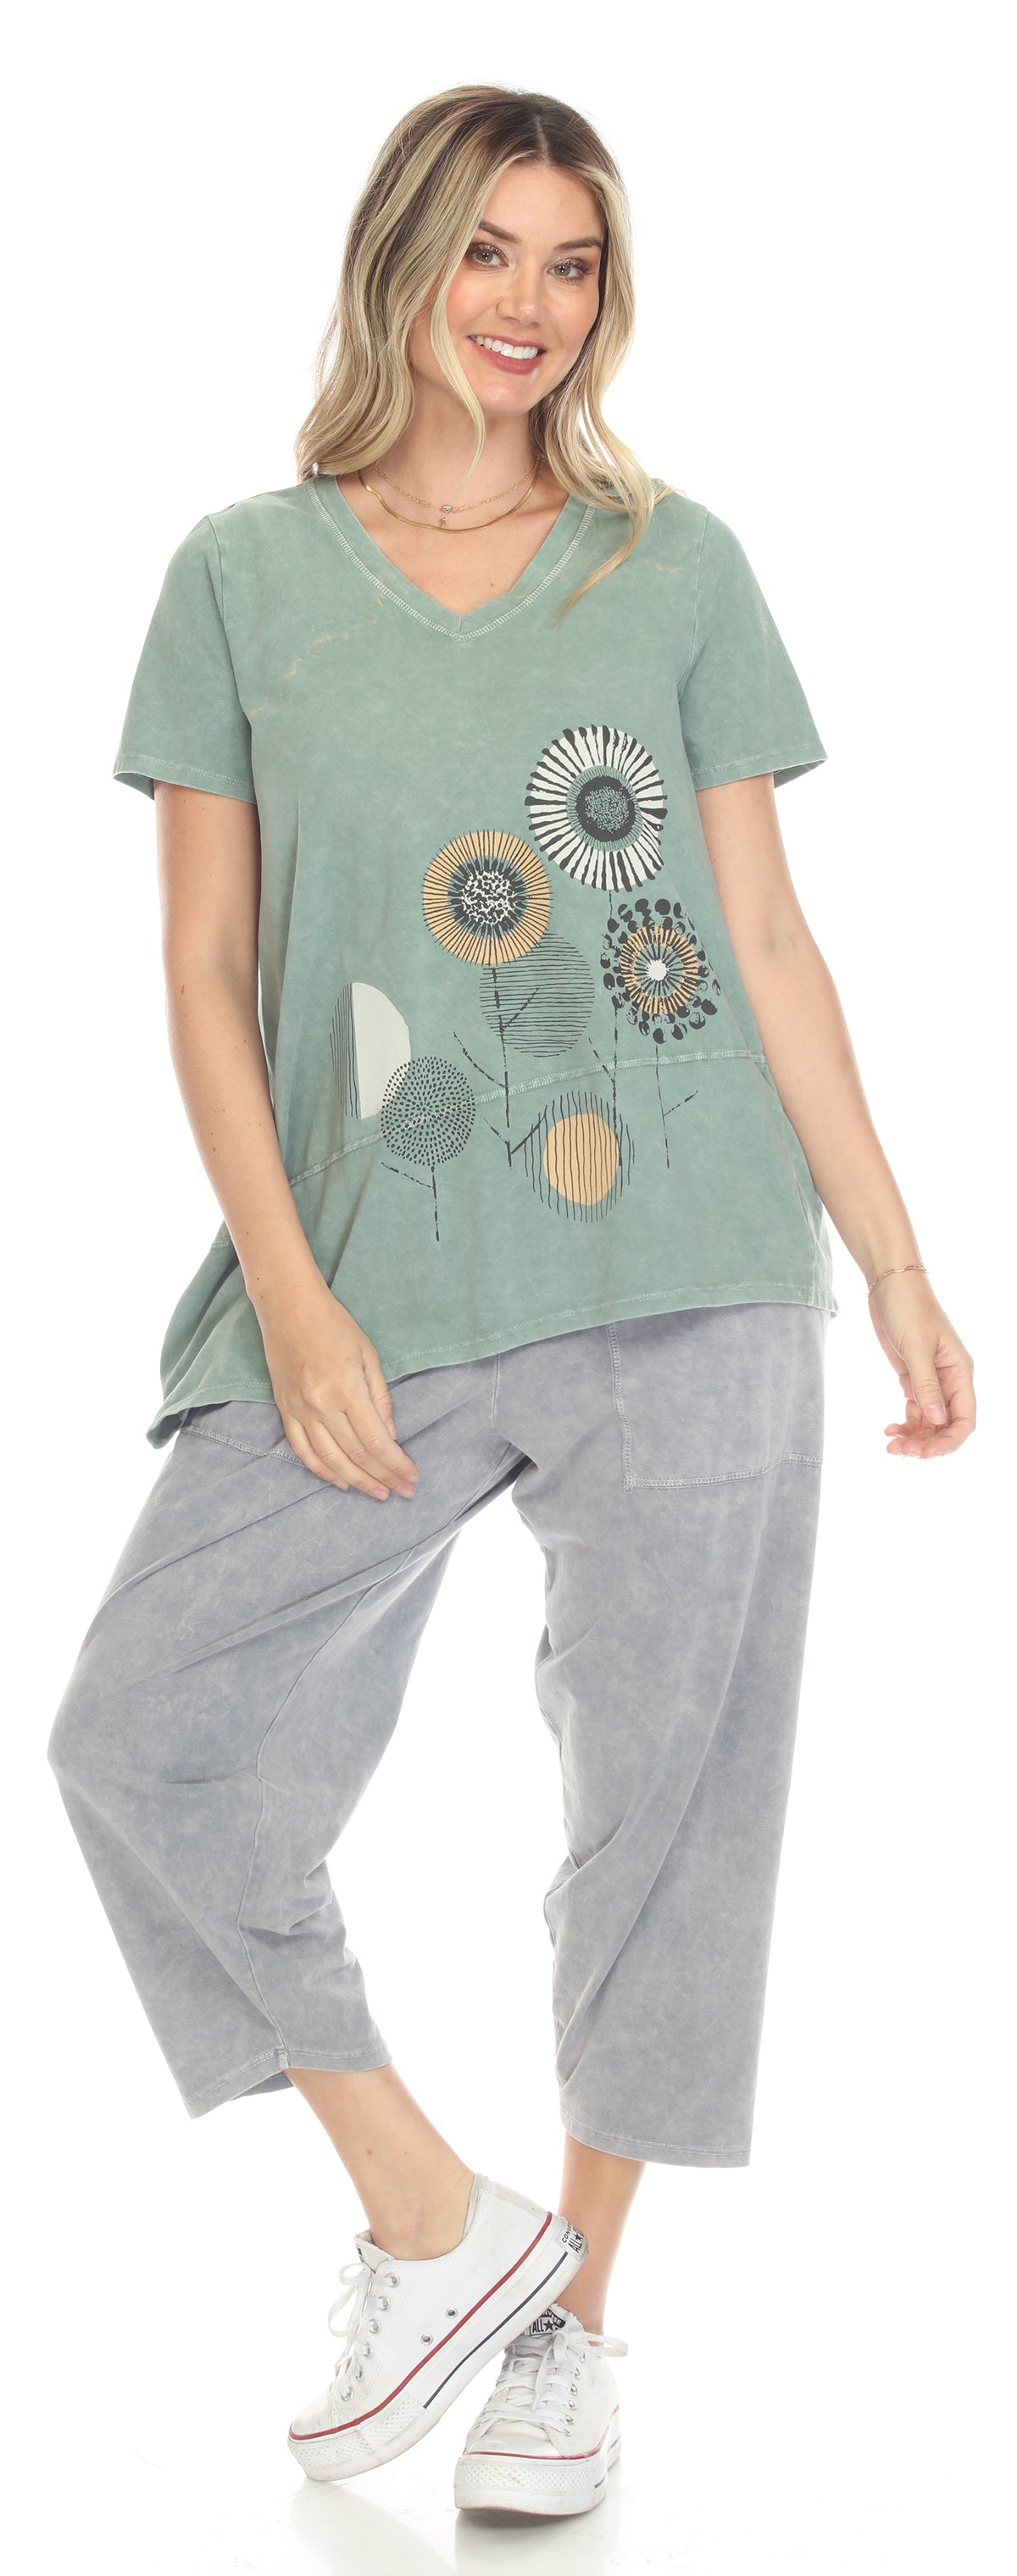 Load image into Gallery viewer, Short Sleeve V neck Wind Whirls Asymmetric Top
